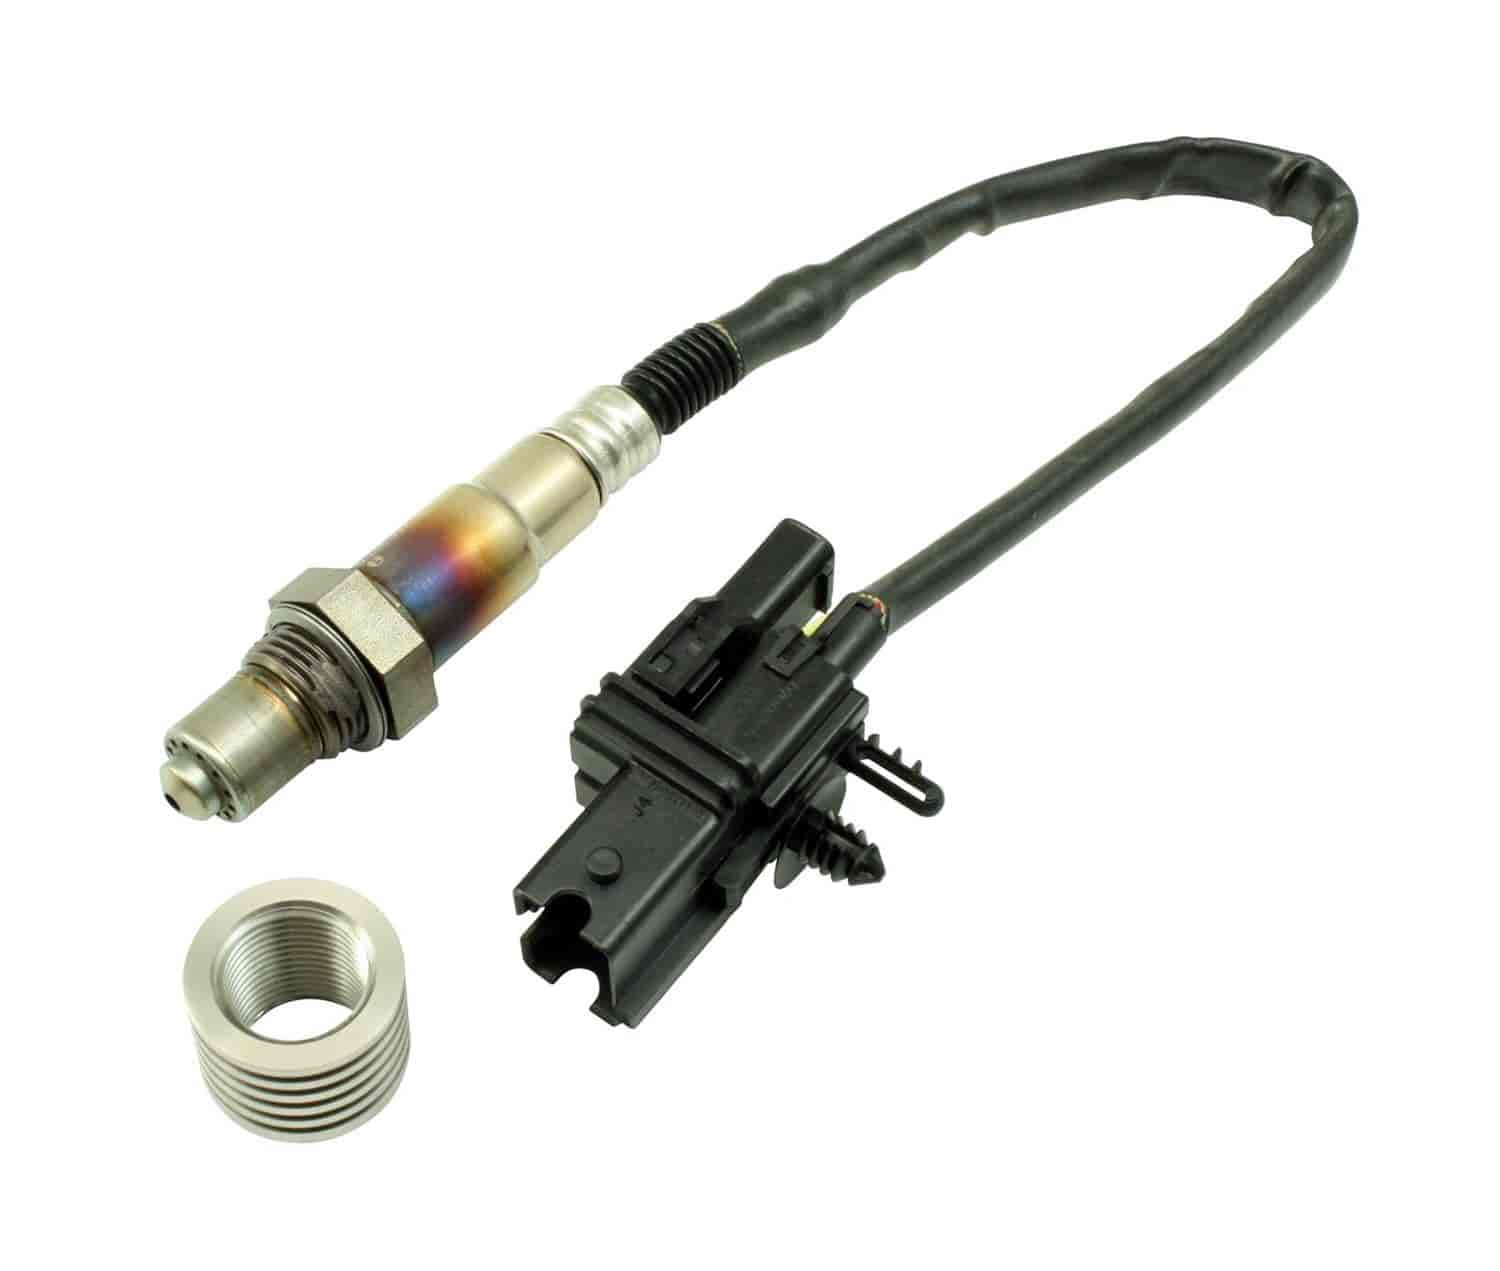 Replacement Sensor and Bung Kit Includes a Bosch 4.2LSU Wideband UEGO Sensor